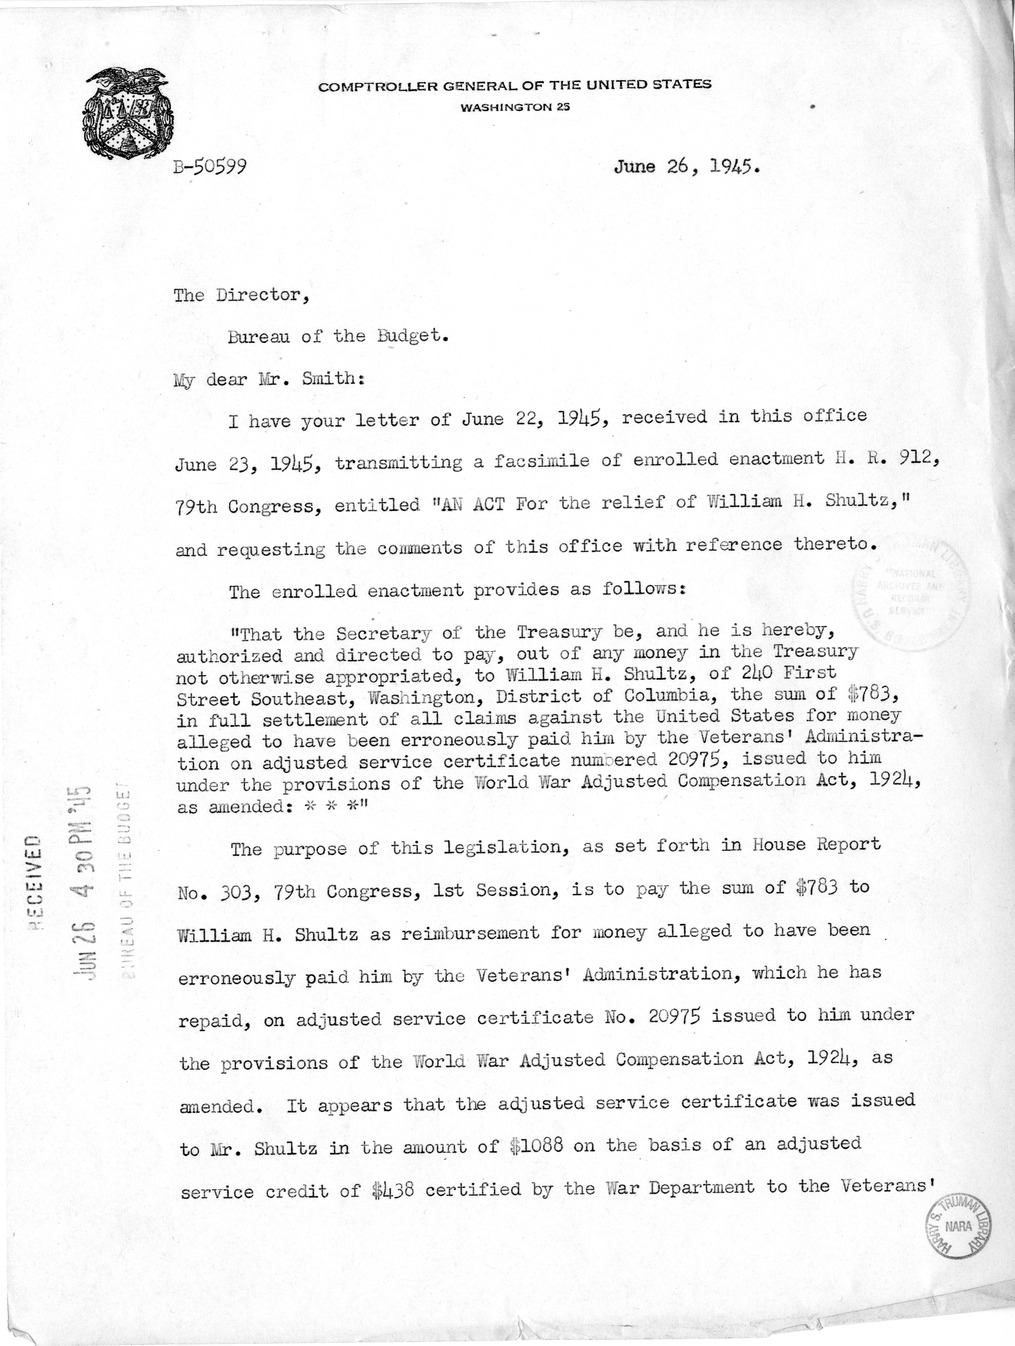 Memorandum from Harold D. Smith to M. C. Latta, H.R. 912, For the Relief of William H. Shultz, with Attachments